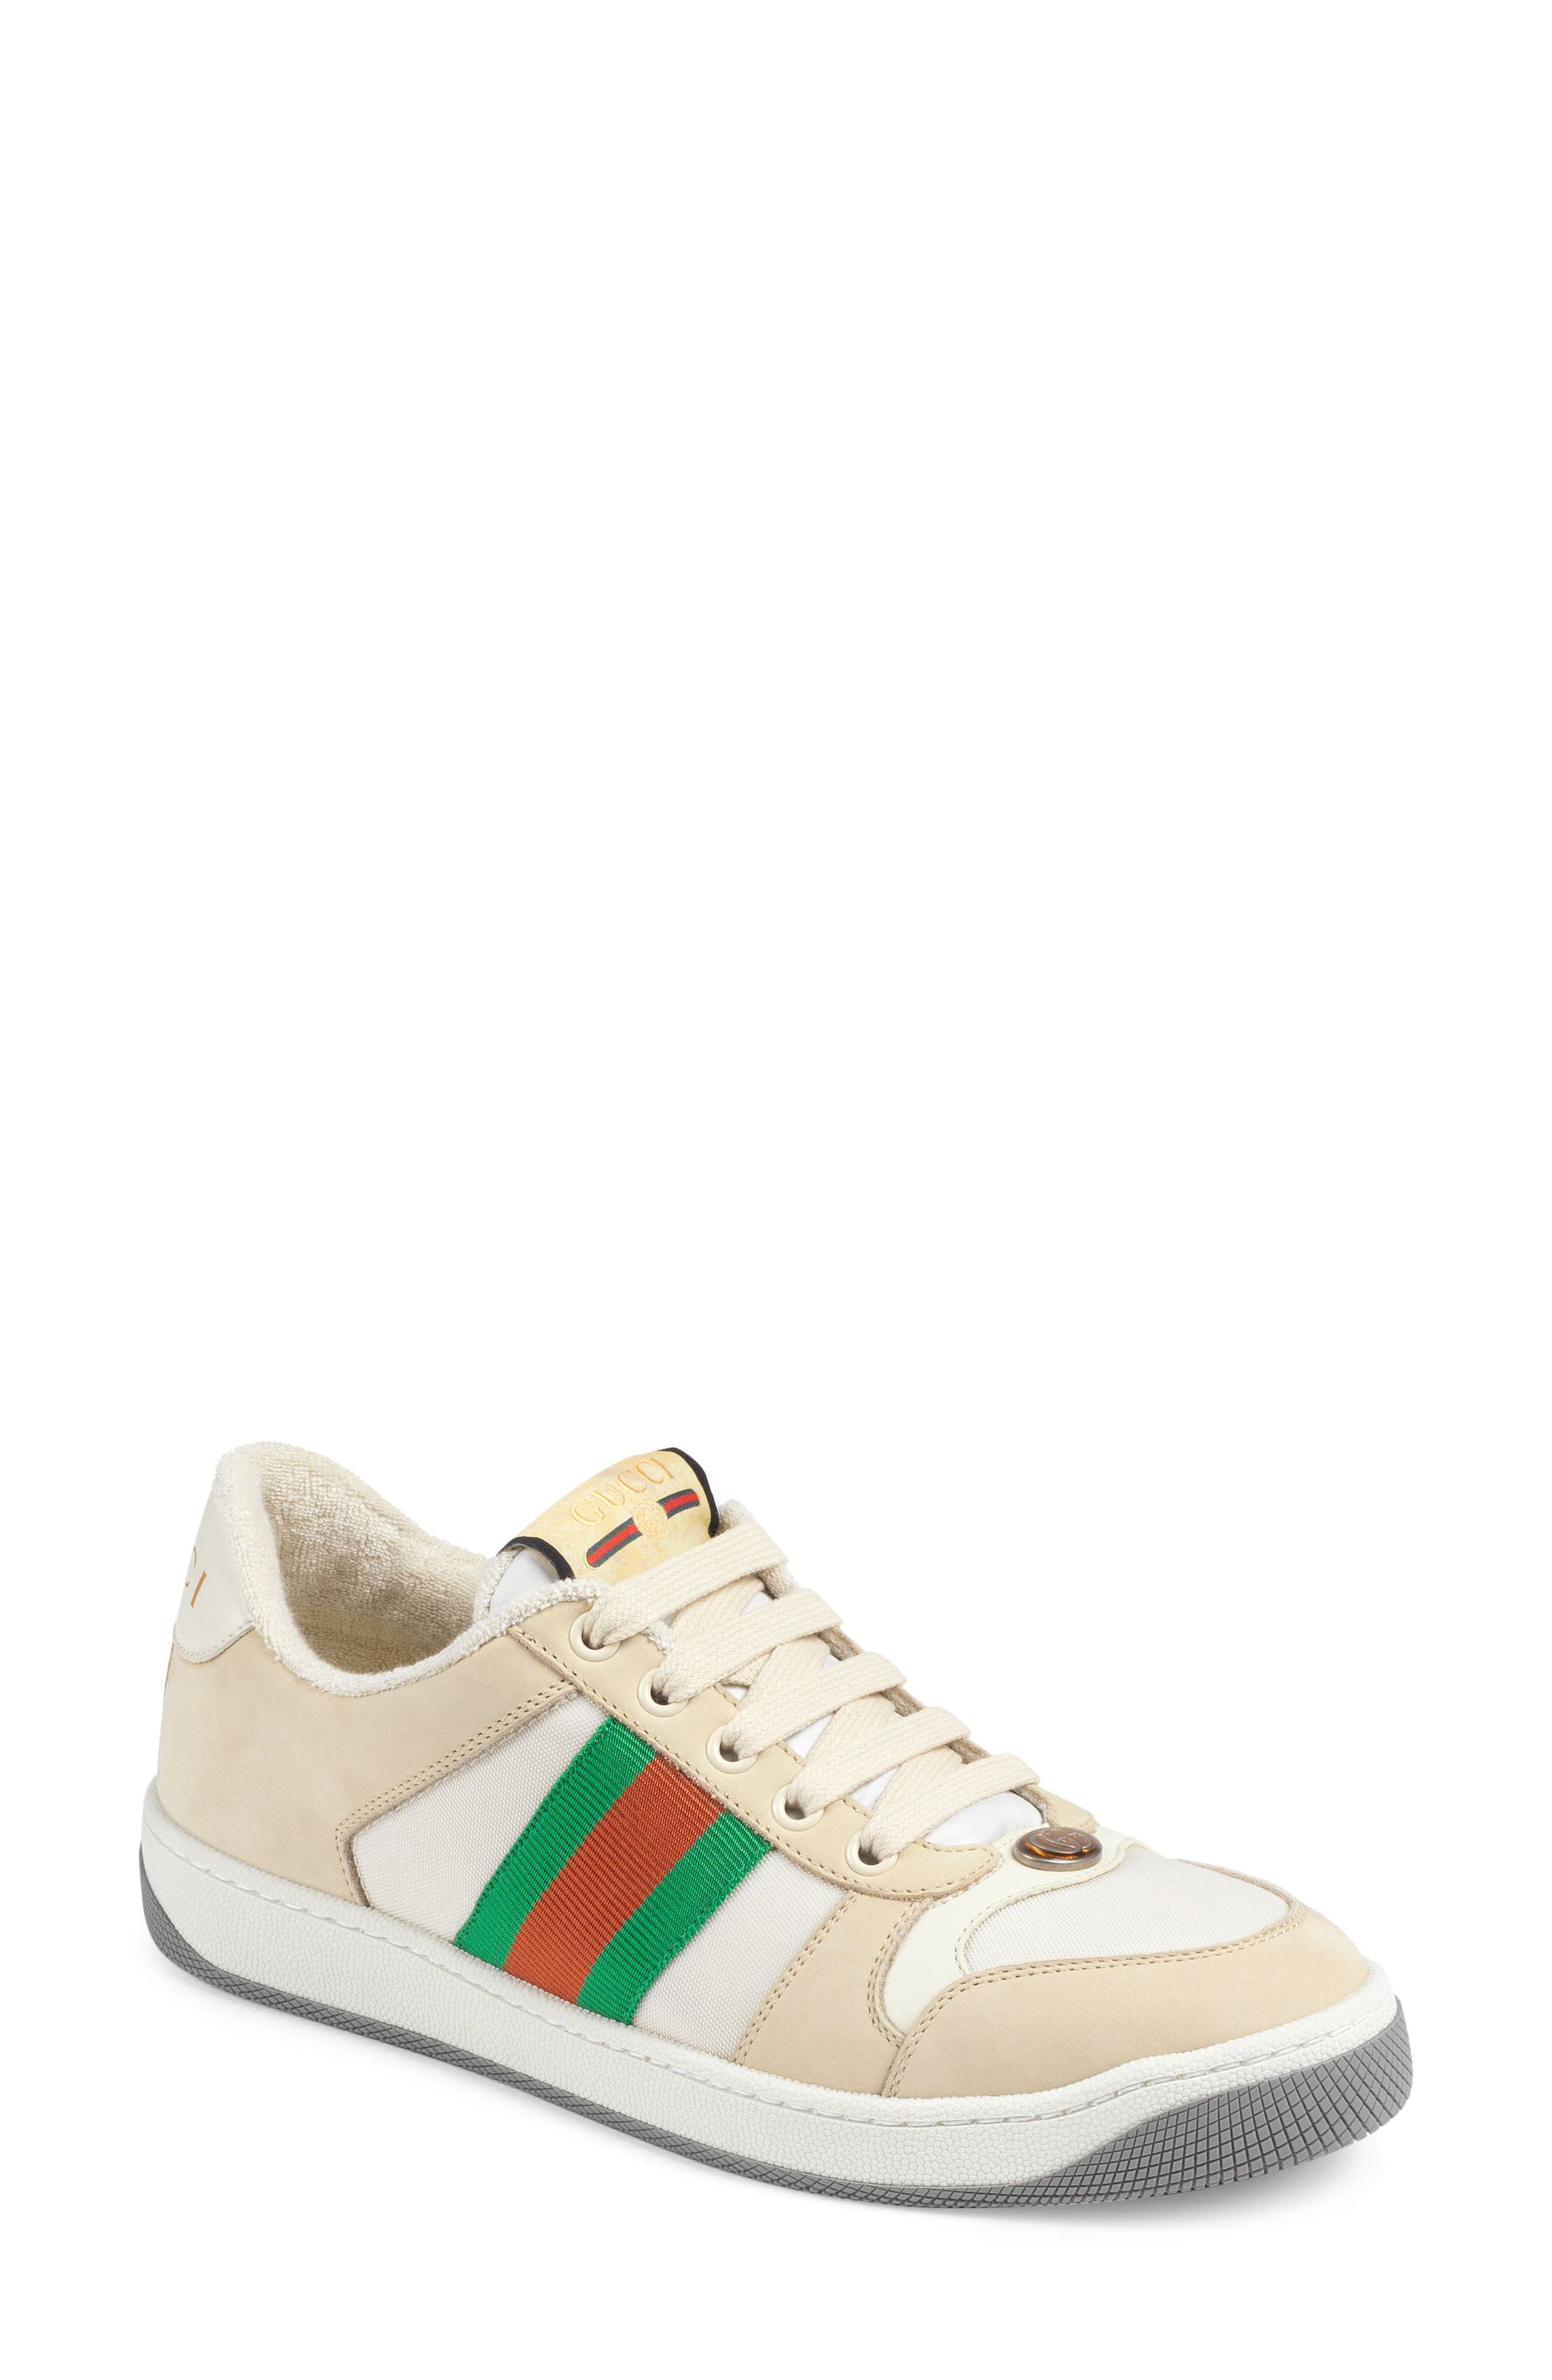 gucci running shoes womens